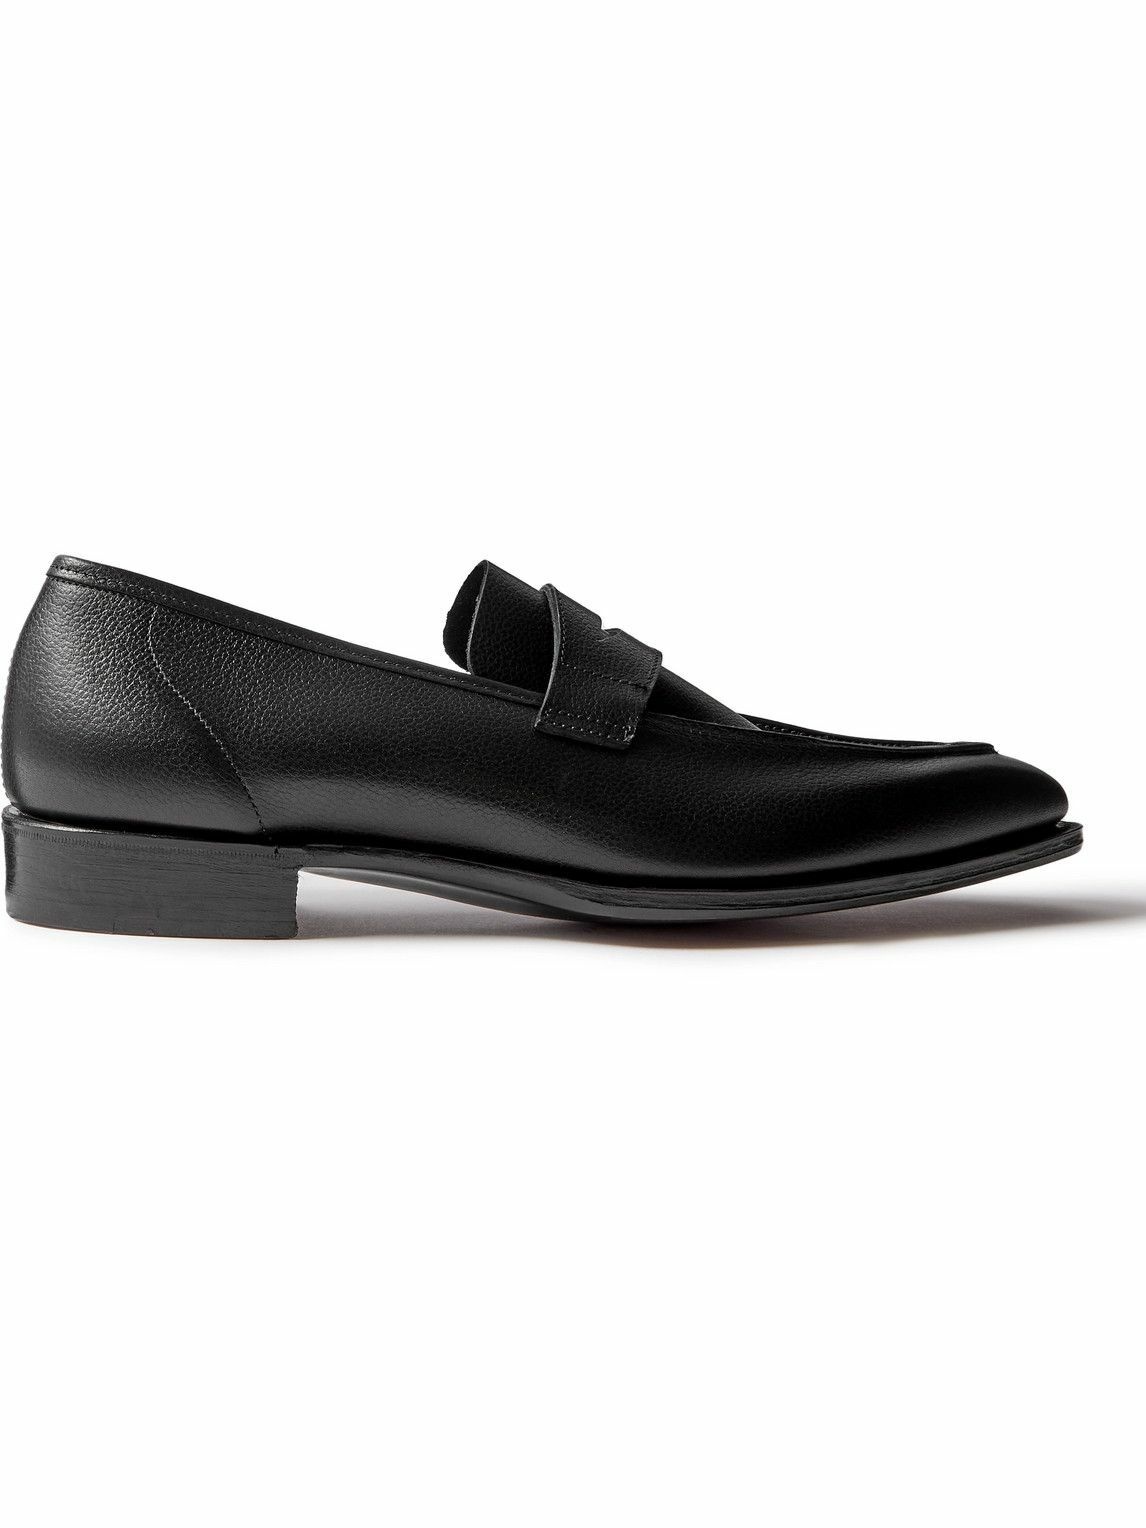 Photo: George Cleverley - George Full-Grain Leather Penny Loafers - Black